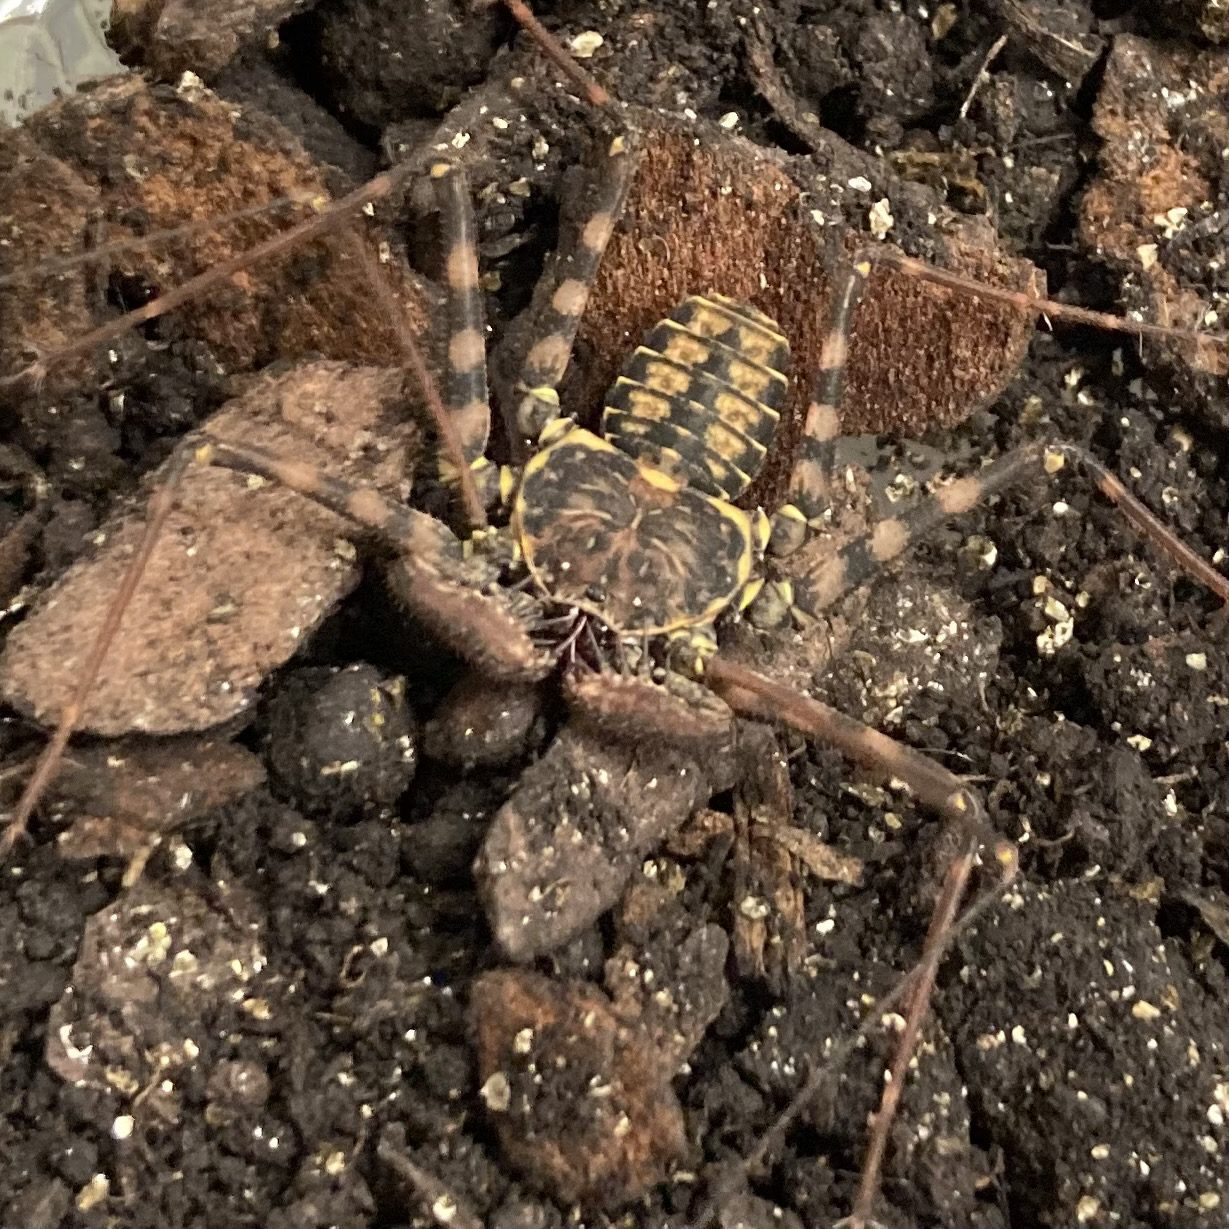 WC Mexican Whip Scorpion